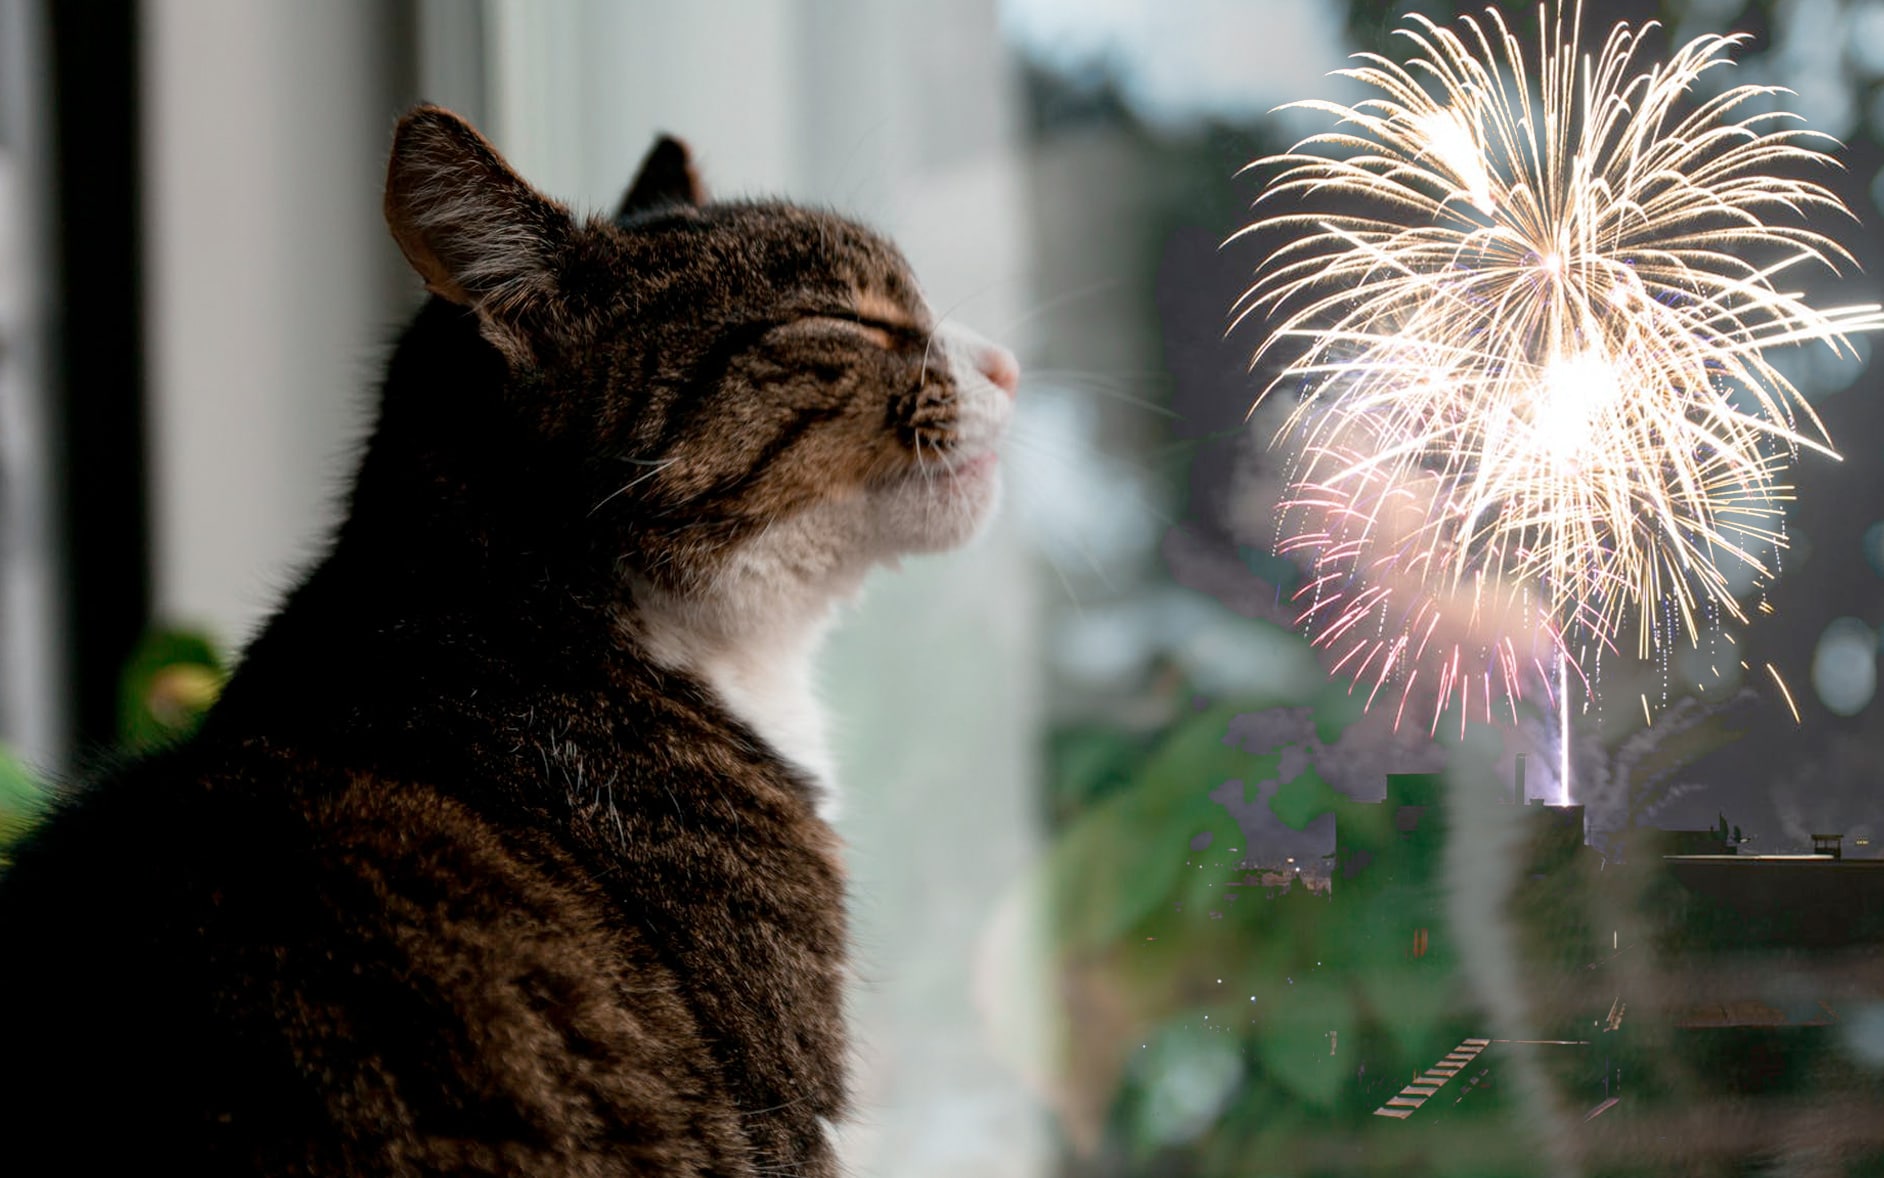 Keeping fireworks from ruining your pet's holiday Leo&Lucky's